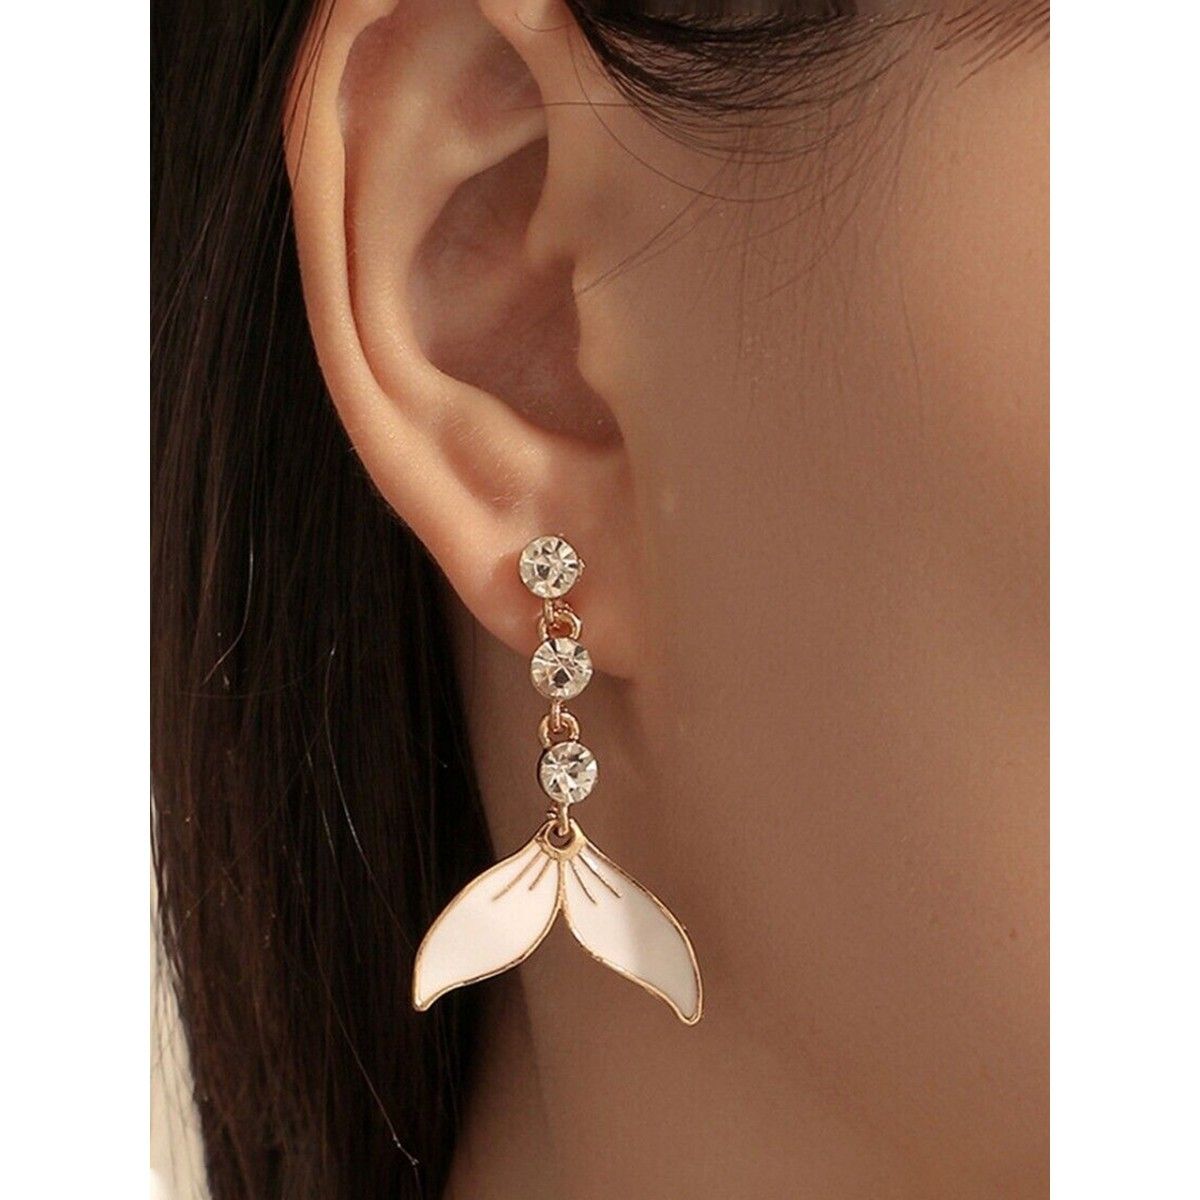 Alloy Pink Stylish Hangings Floral Dangle Drop Earrings